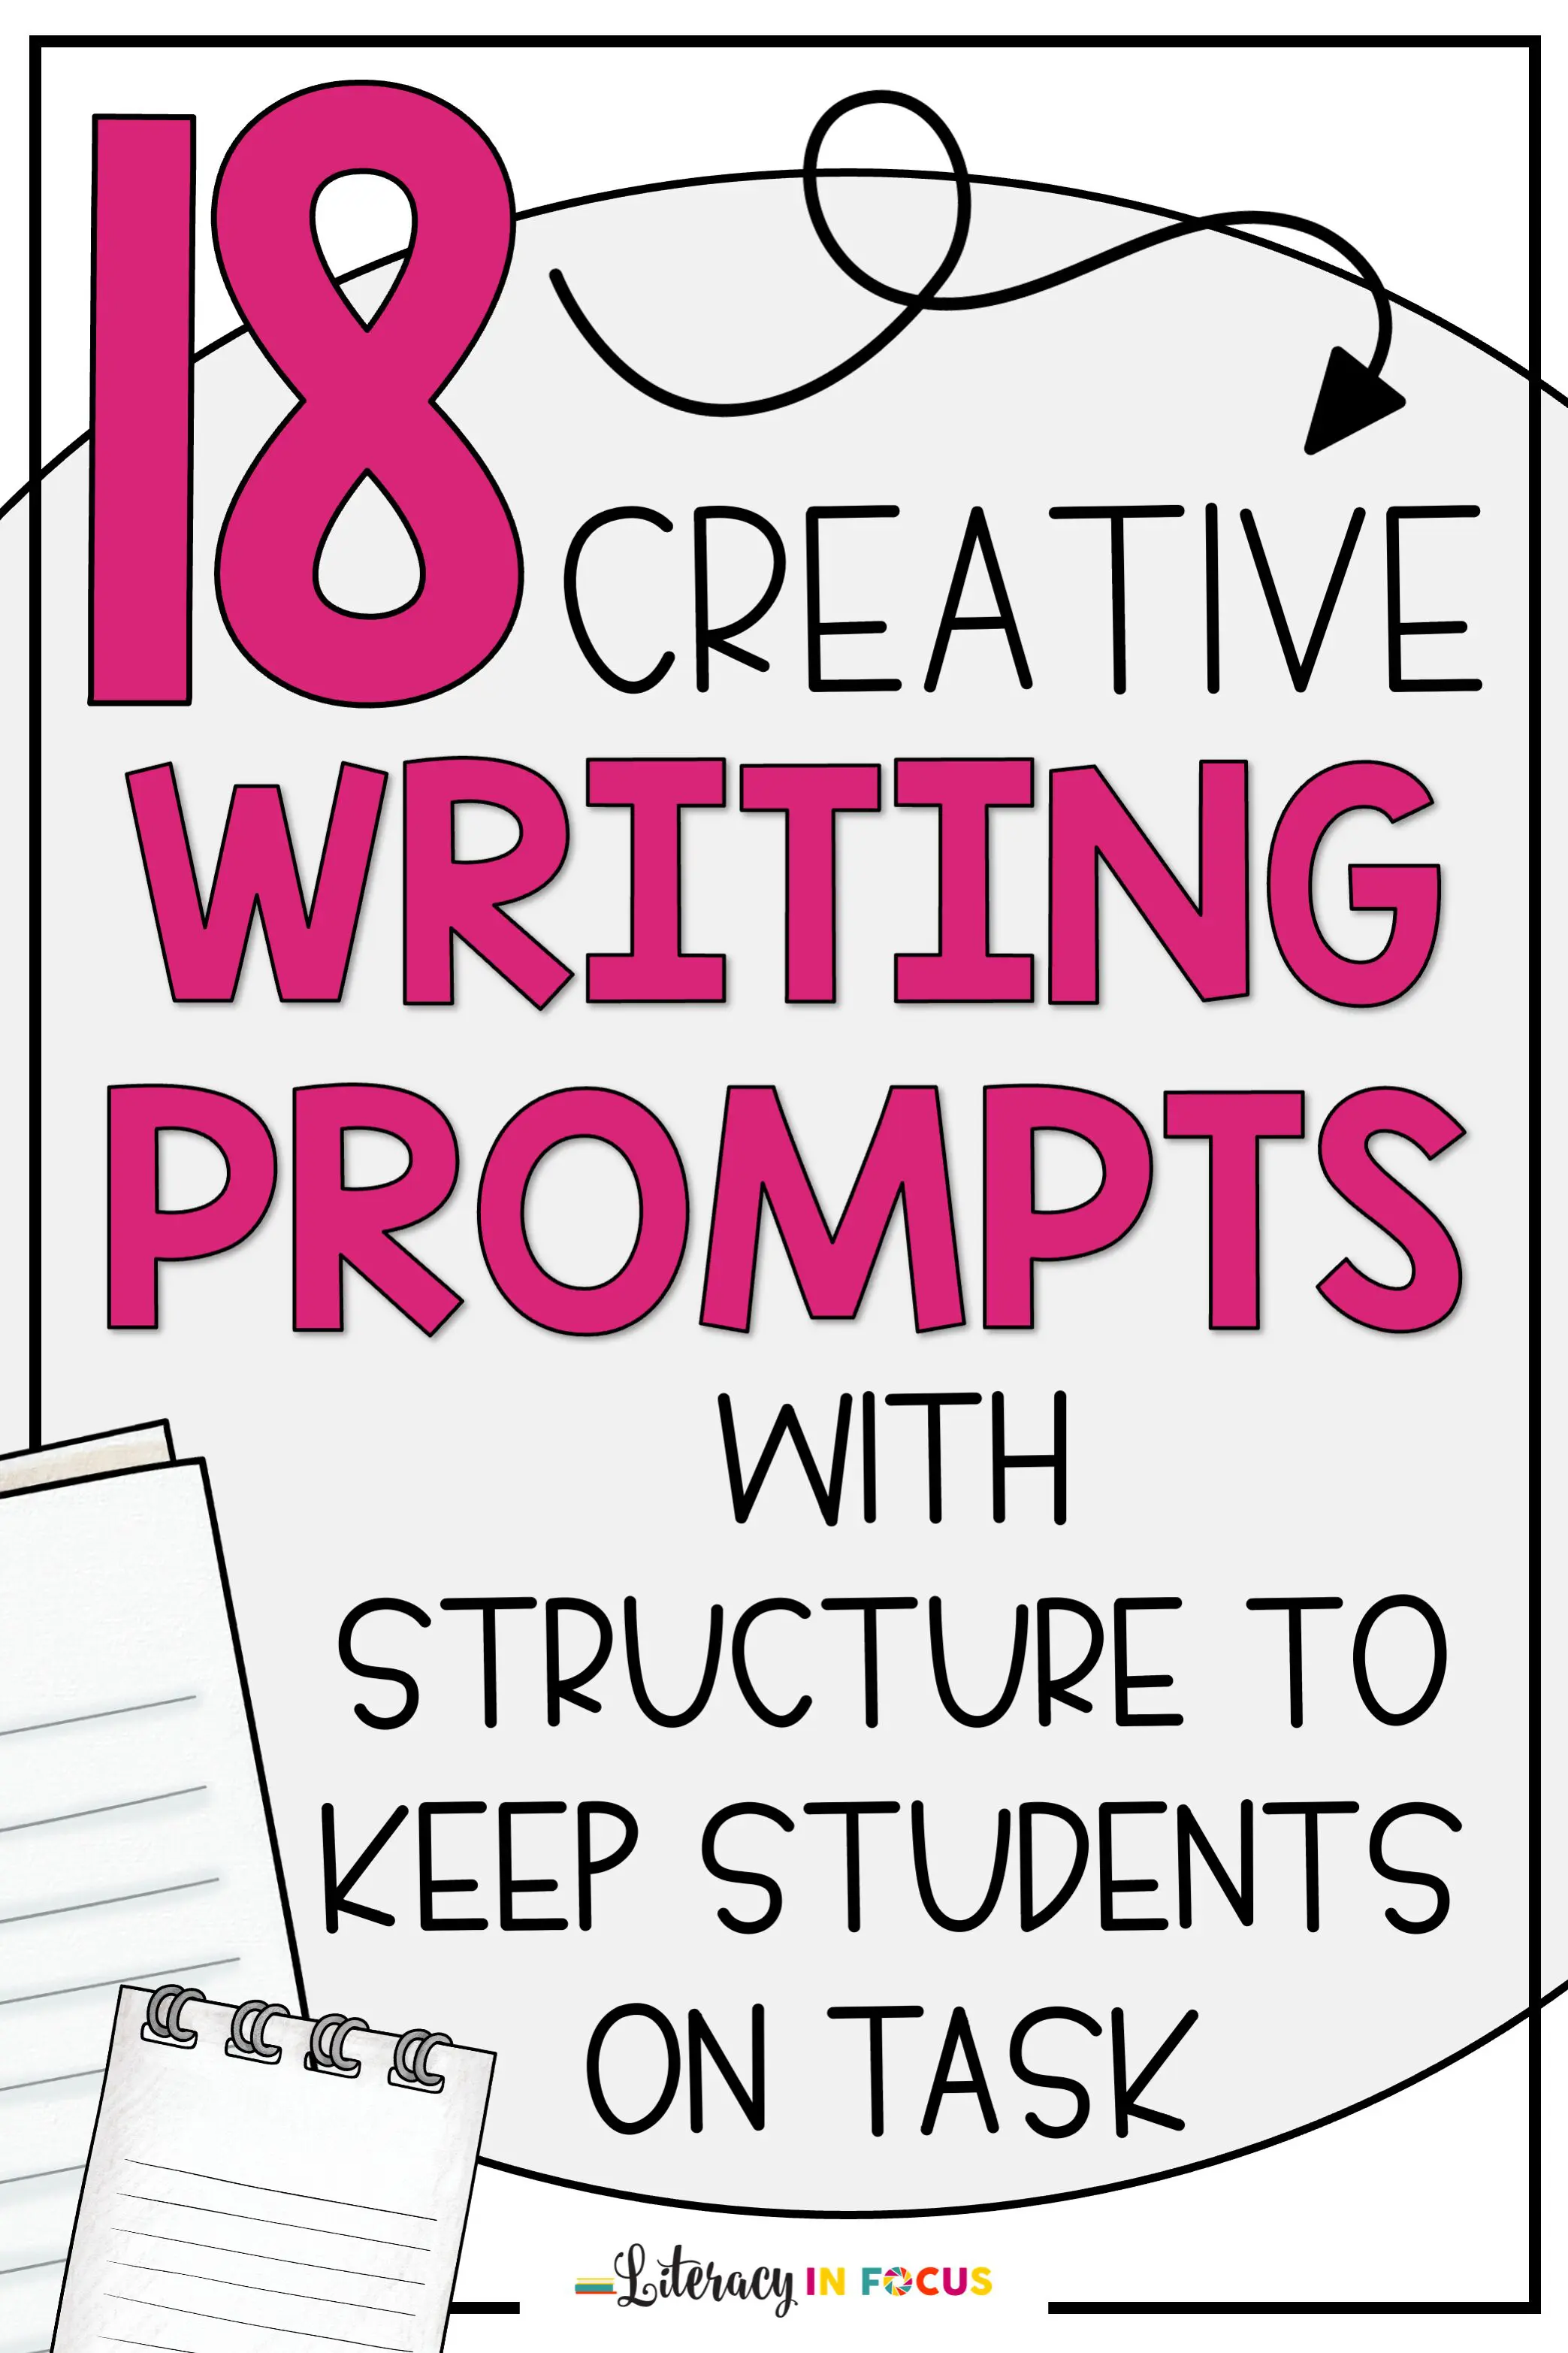 18 Creative Writing Prompts For Kids and Teens